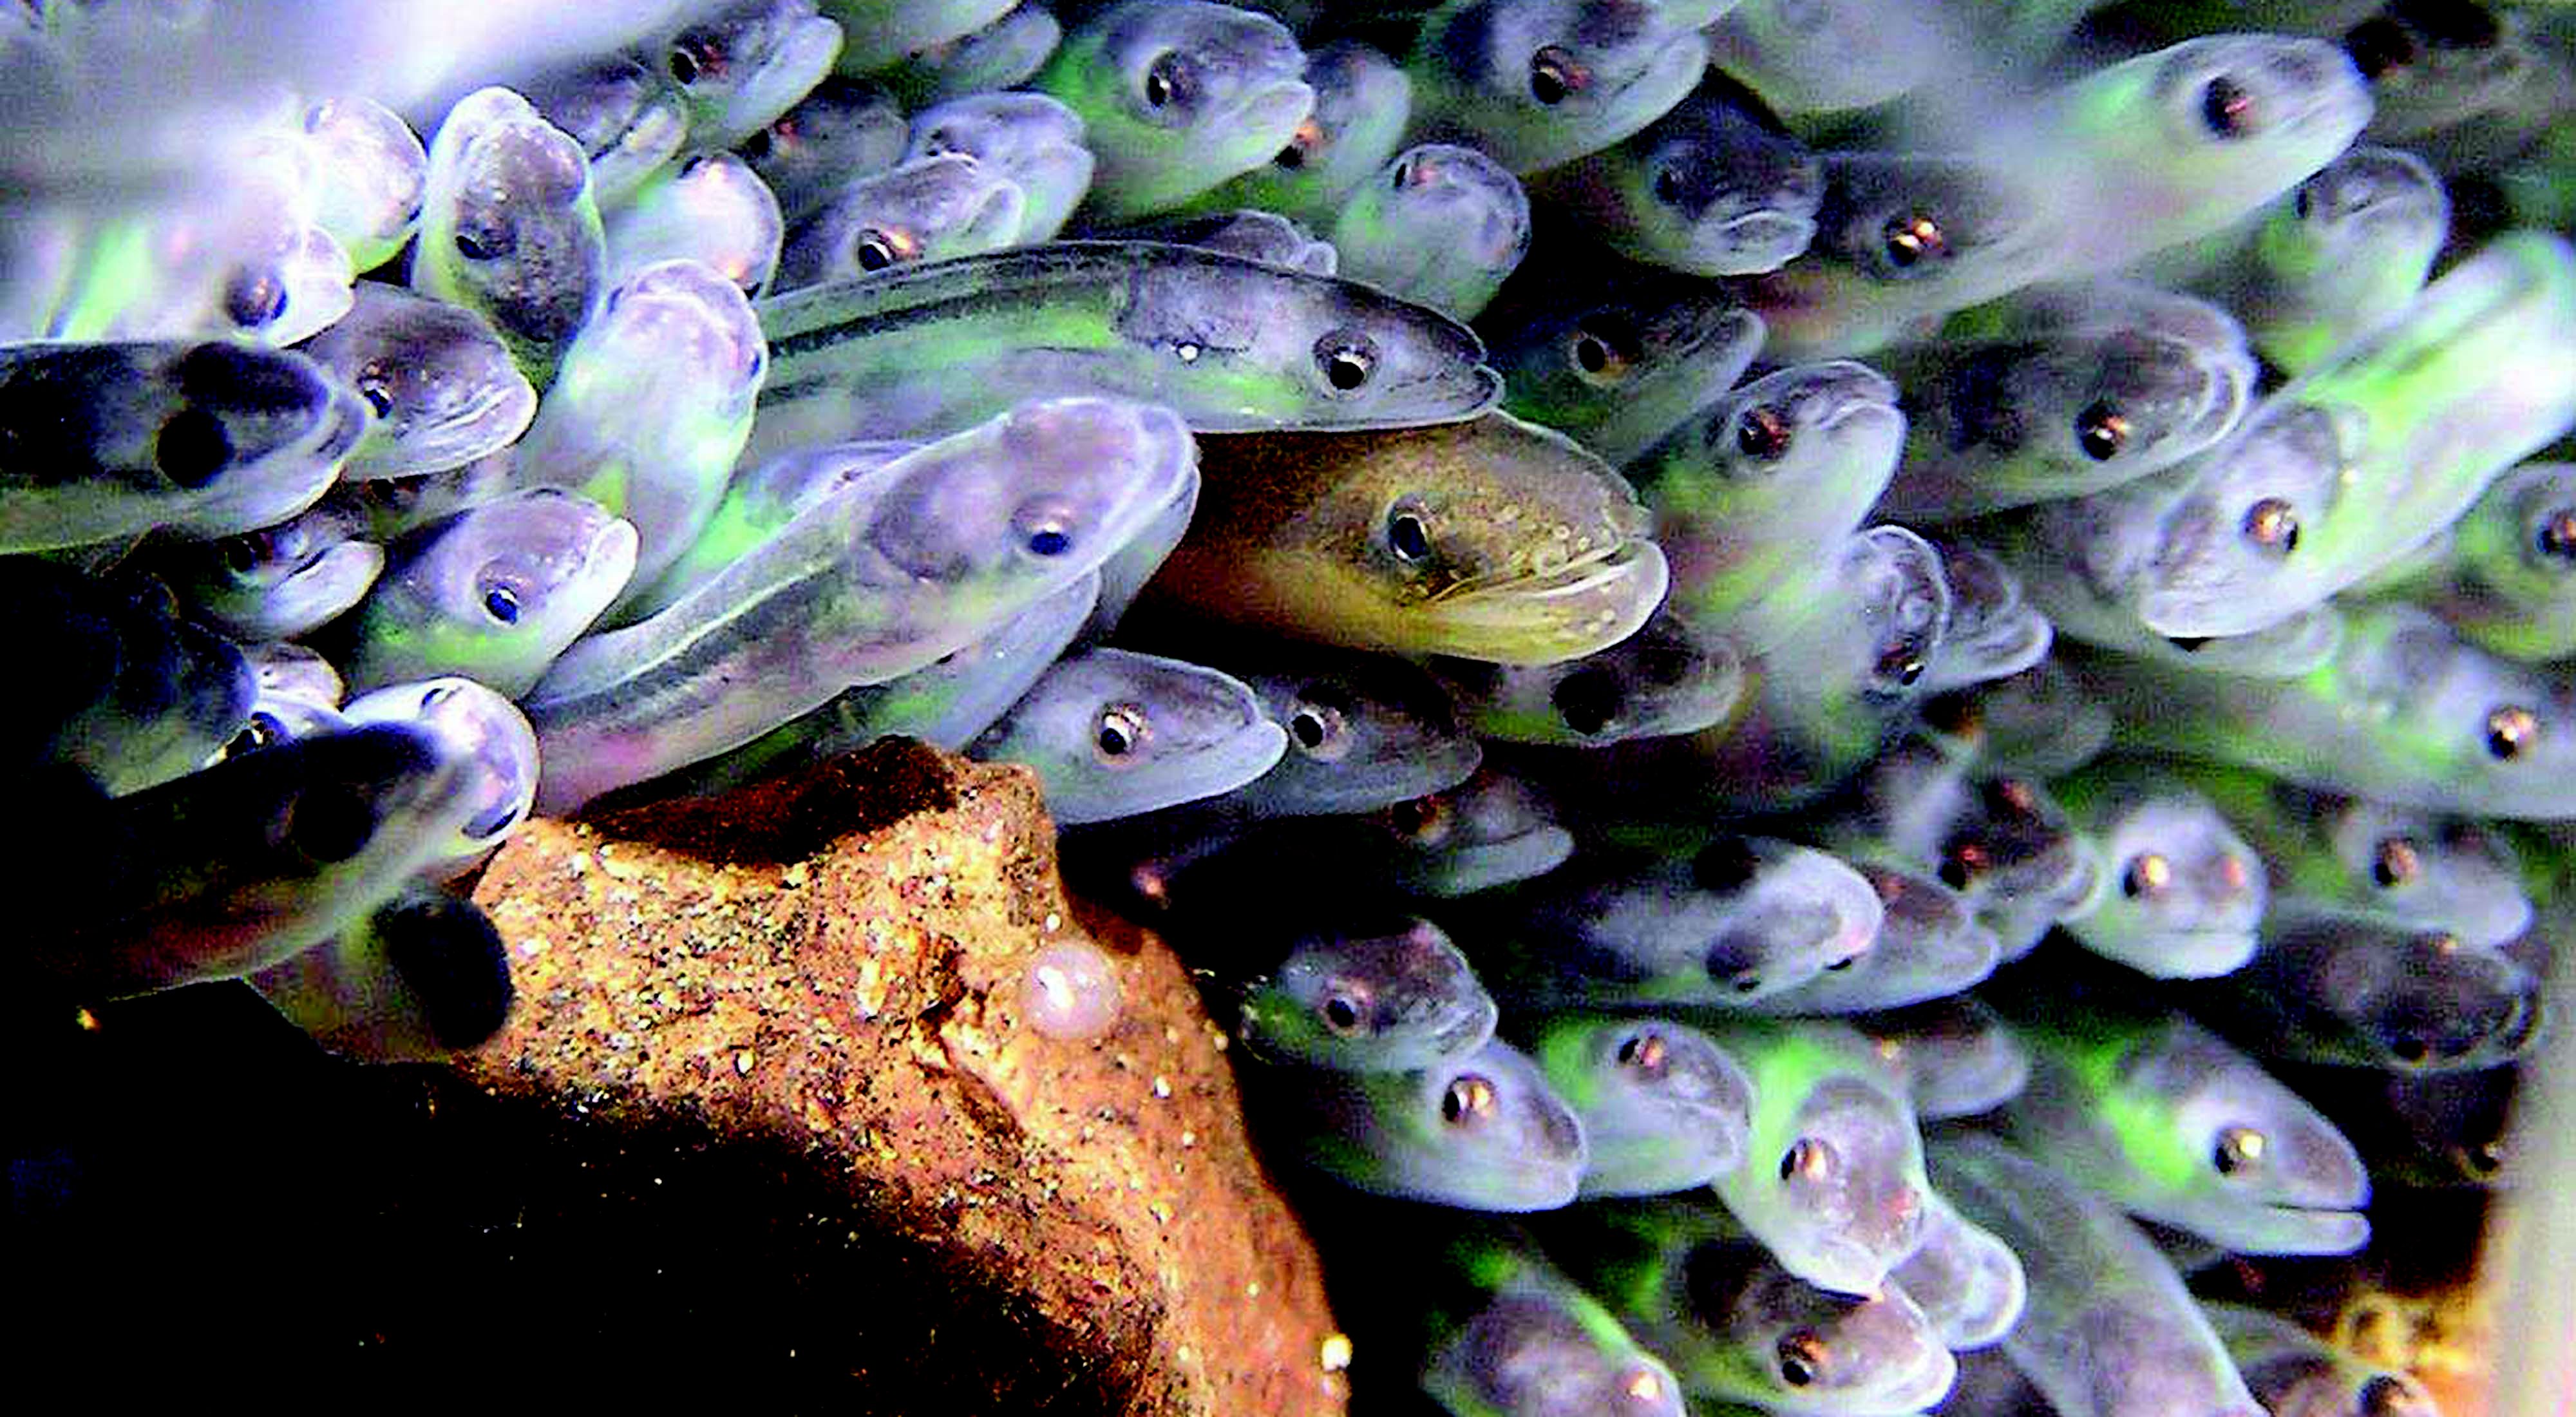 Closeup of 50 or so tiny blue and green eels all bunched together with their heads facing the camera.